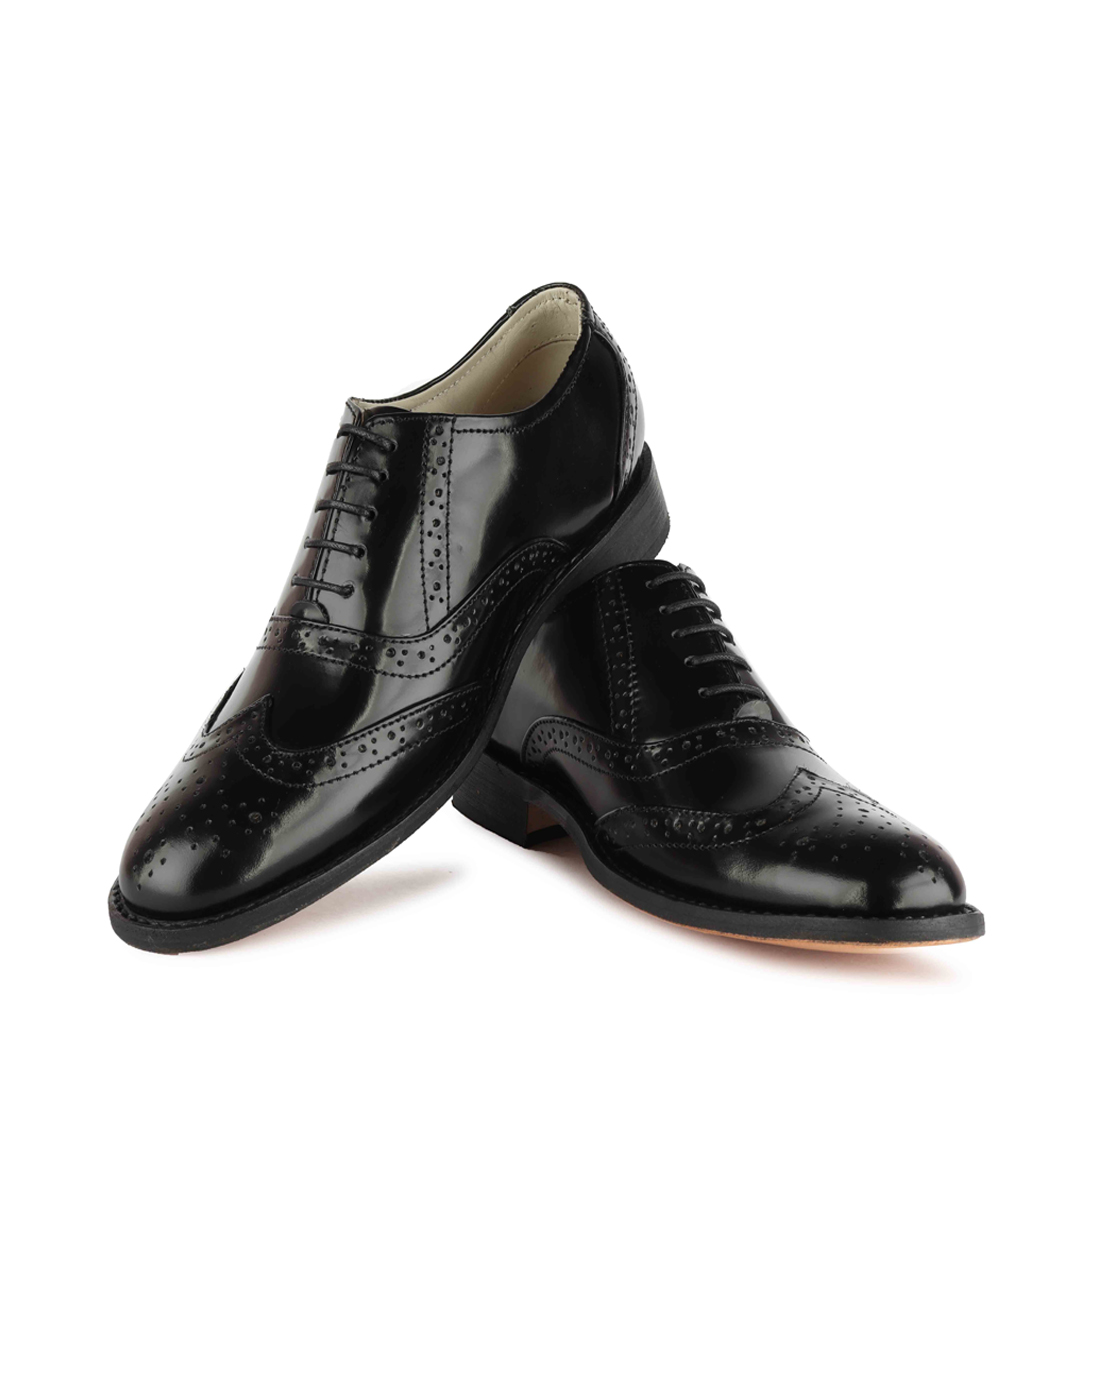 Black Leather Brogue Shoes